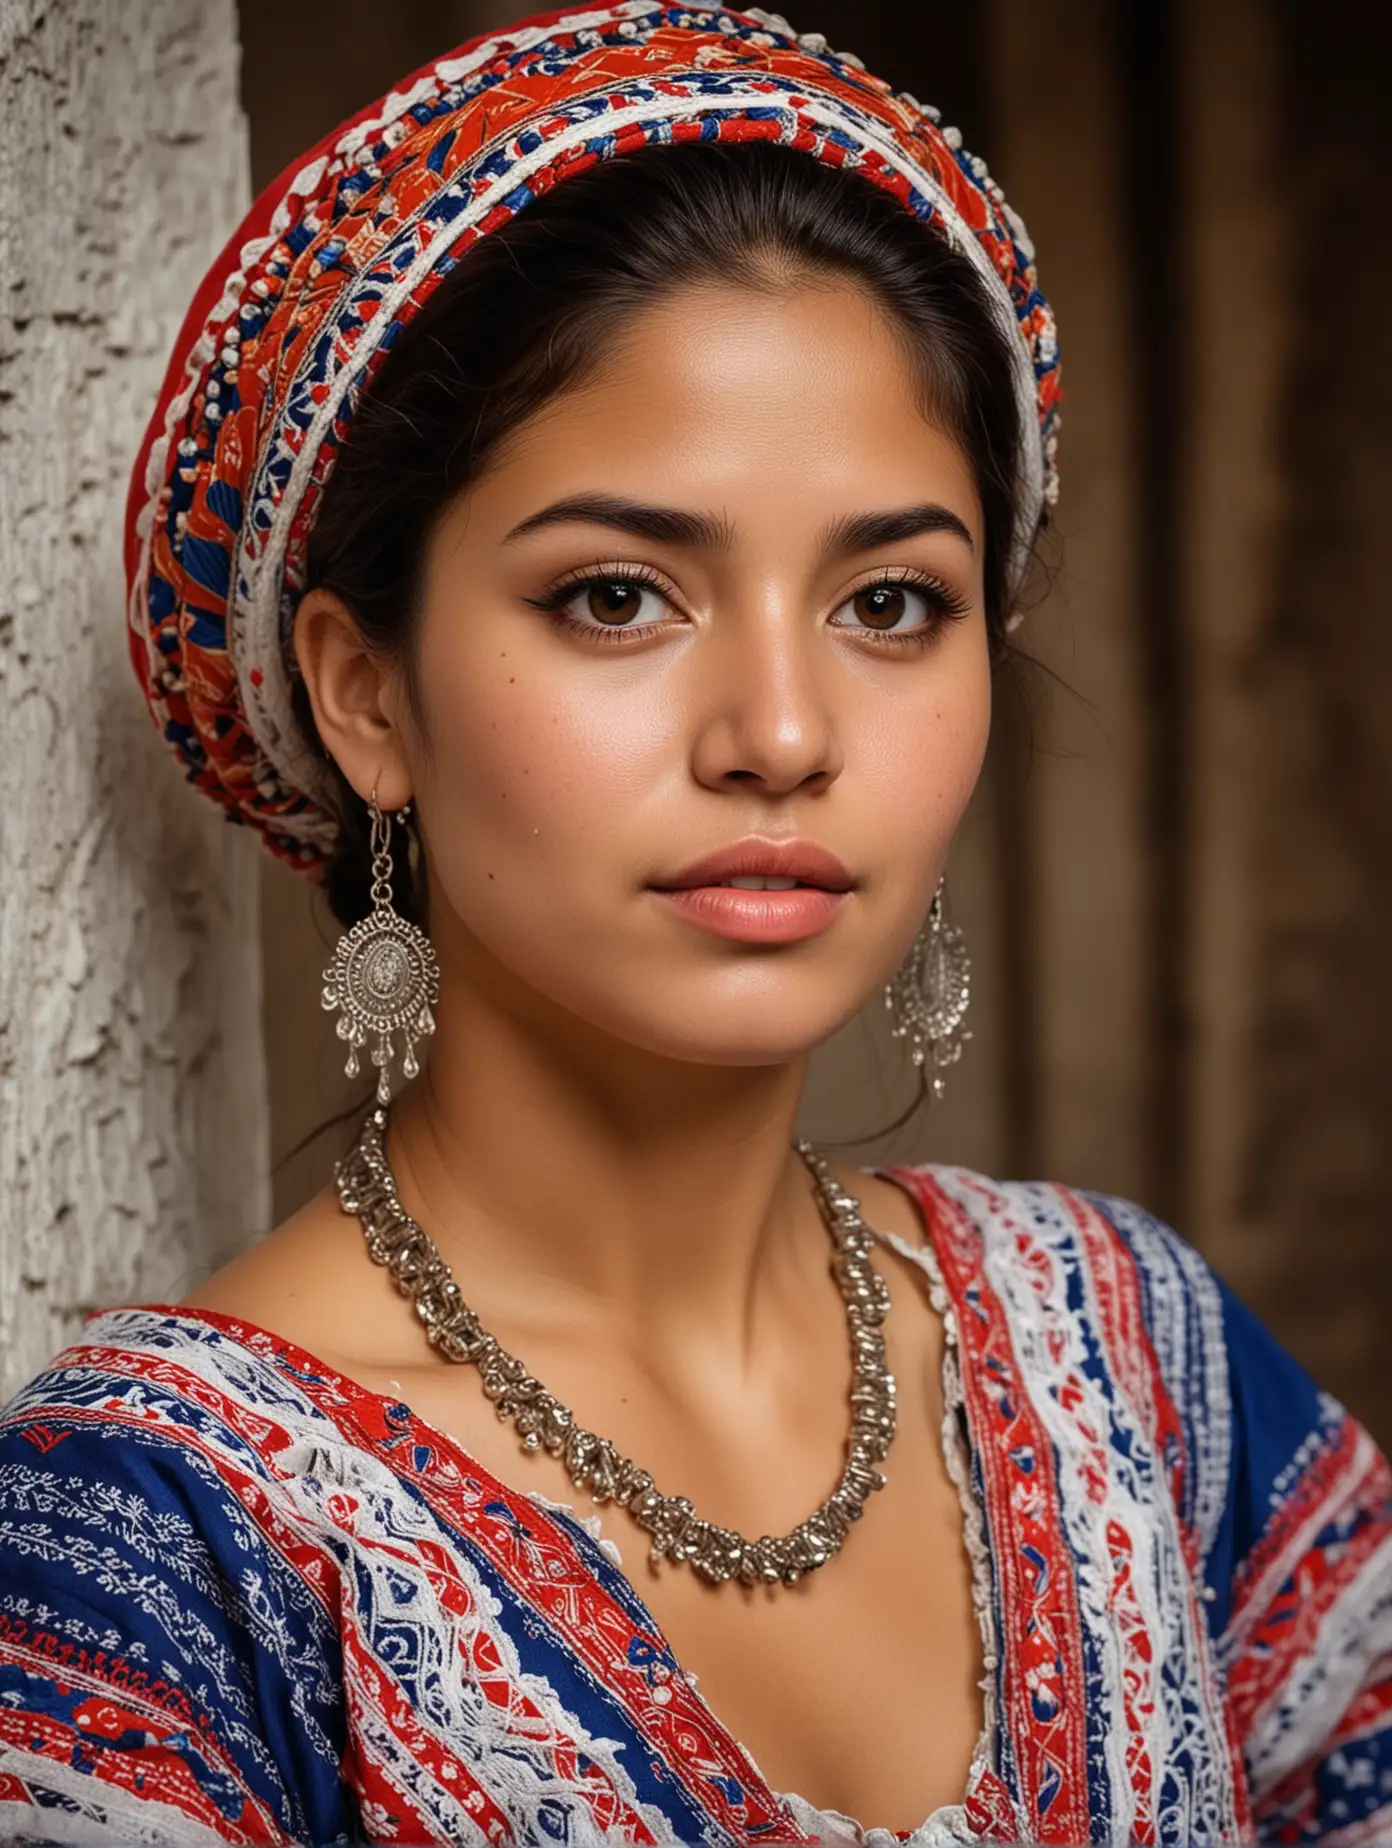 A beautiful woman, Salvadoran, wearing Salvadoran traditional clothing, with exquisite facial features, known for her architectural background from El Salvador, proficient in professional photography technology